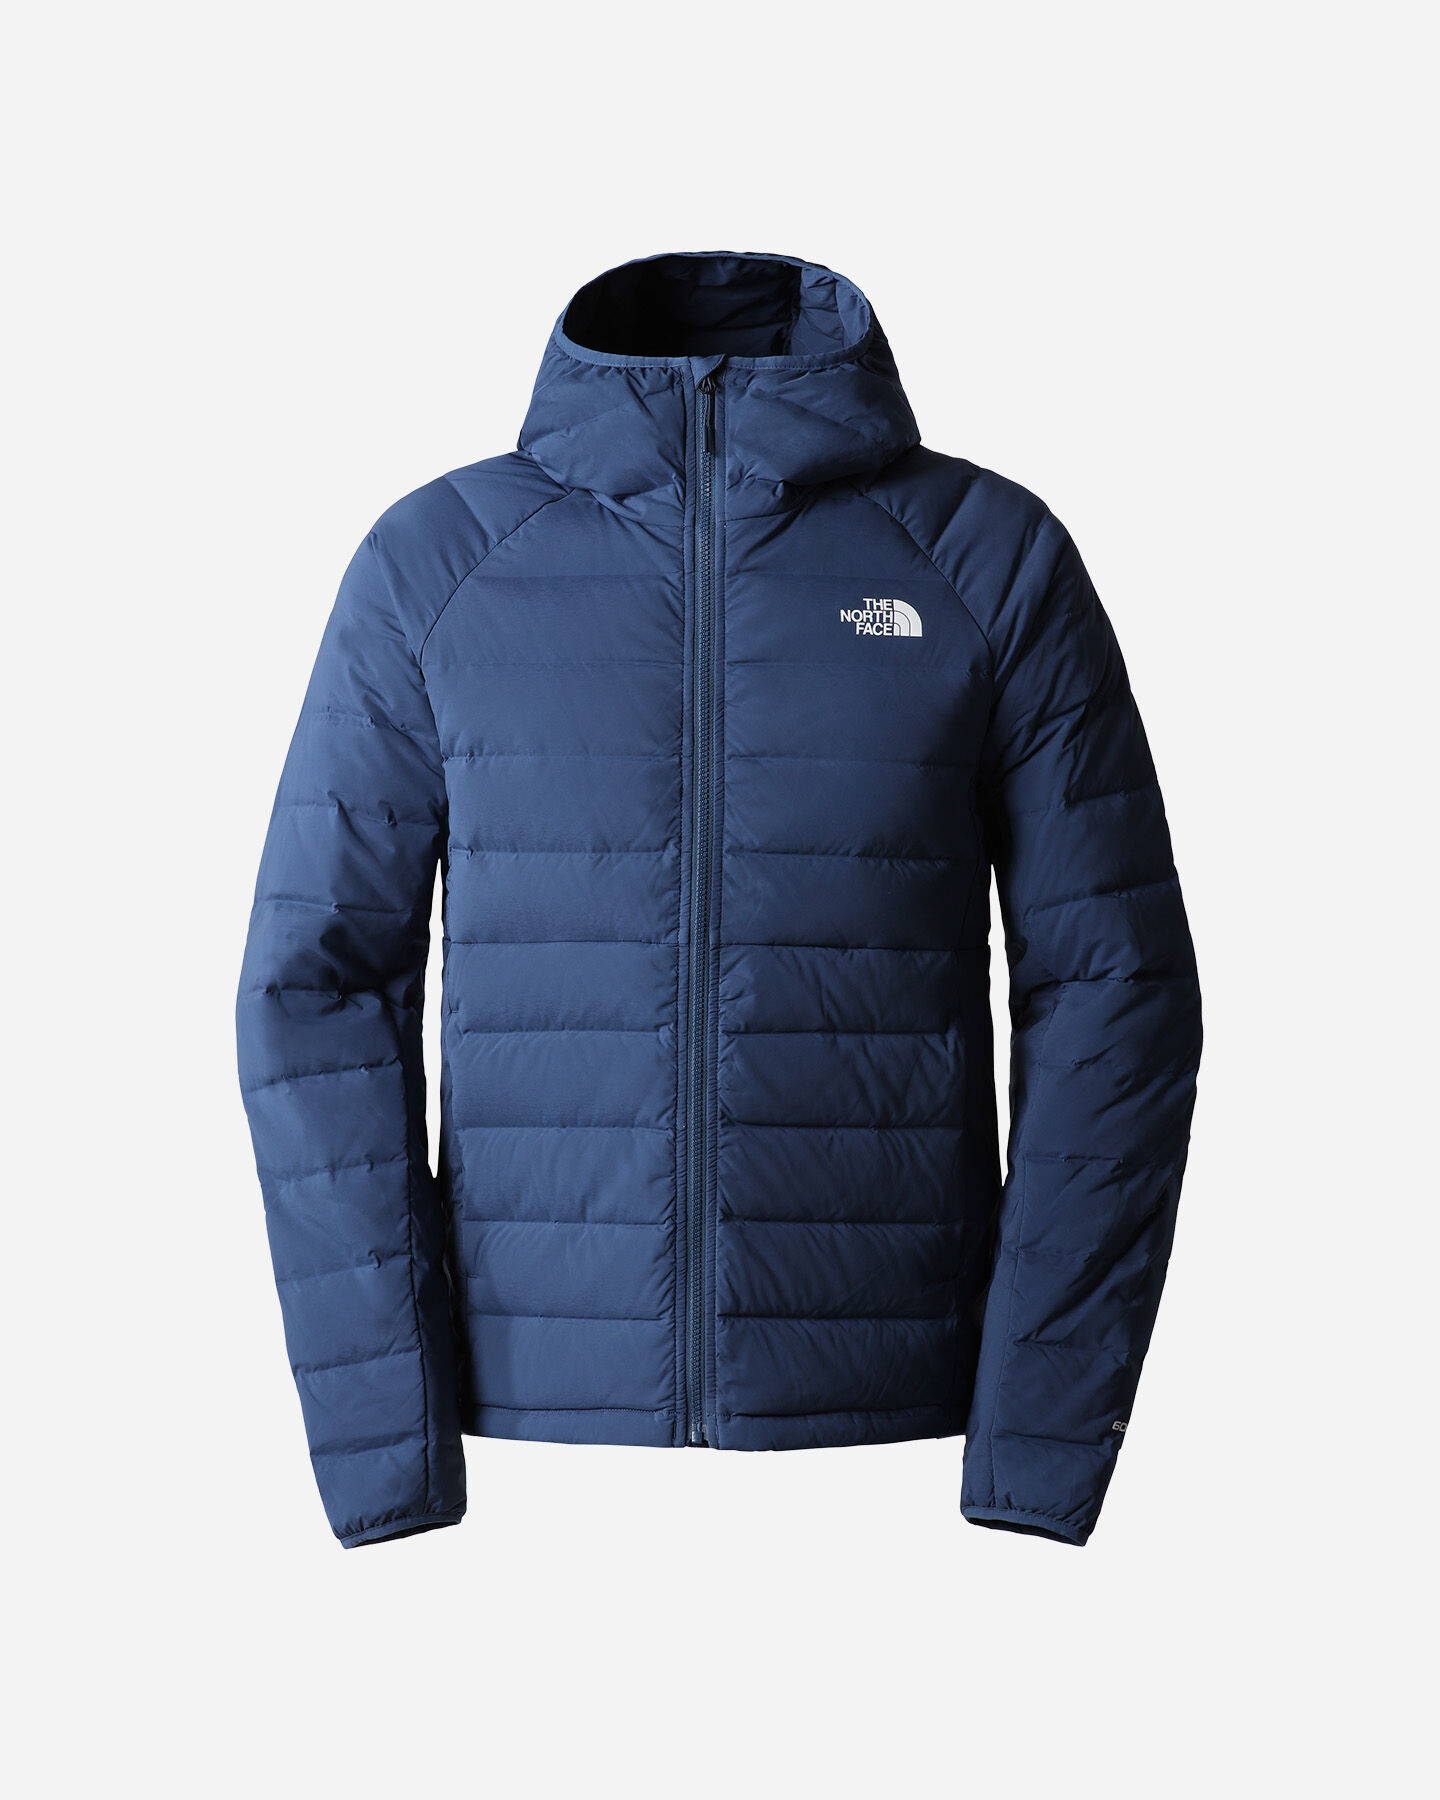  Giubbotto THE NORTH FACE BELLEVIEW M S5475276|HDC|XL scatto 0